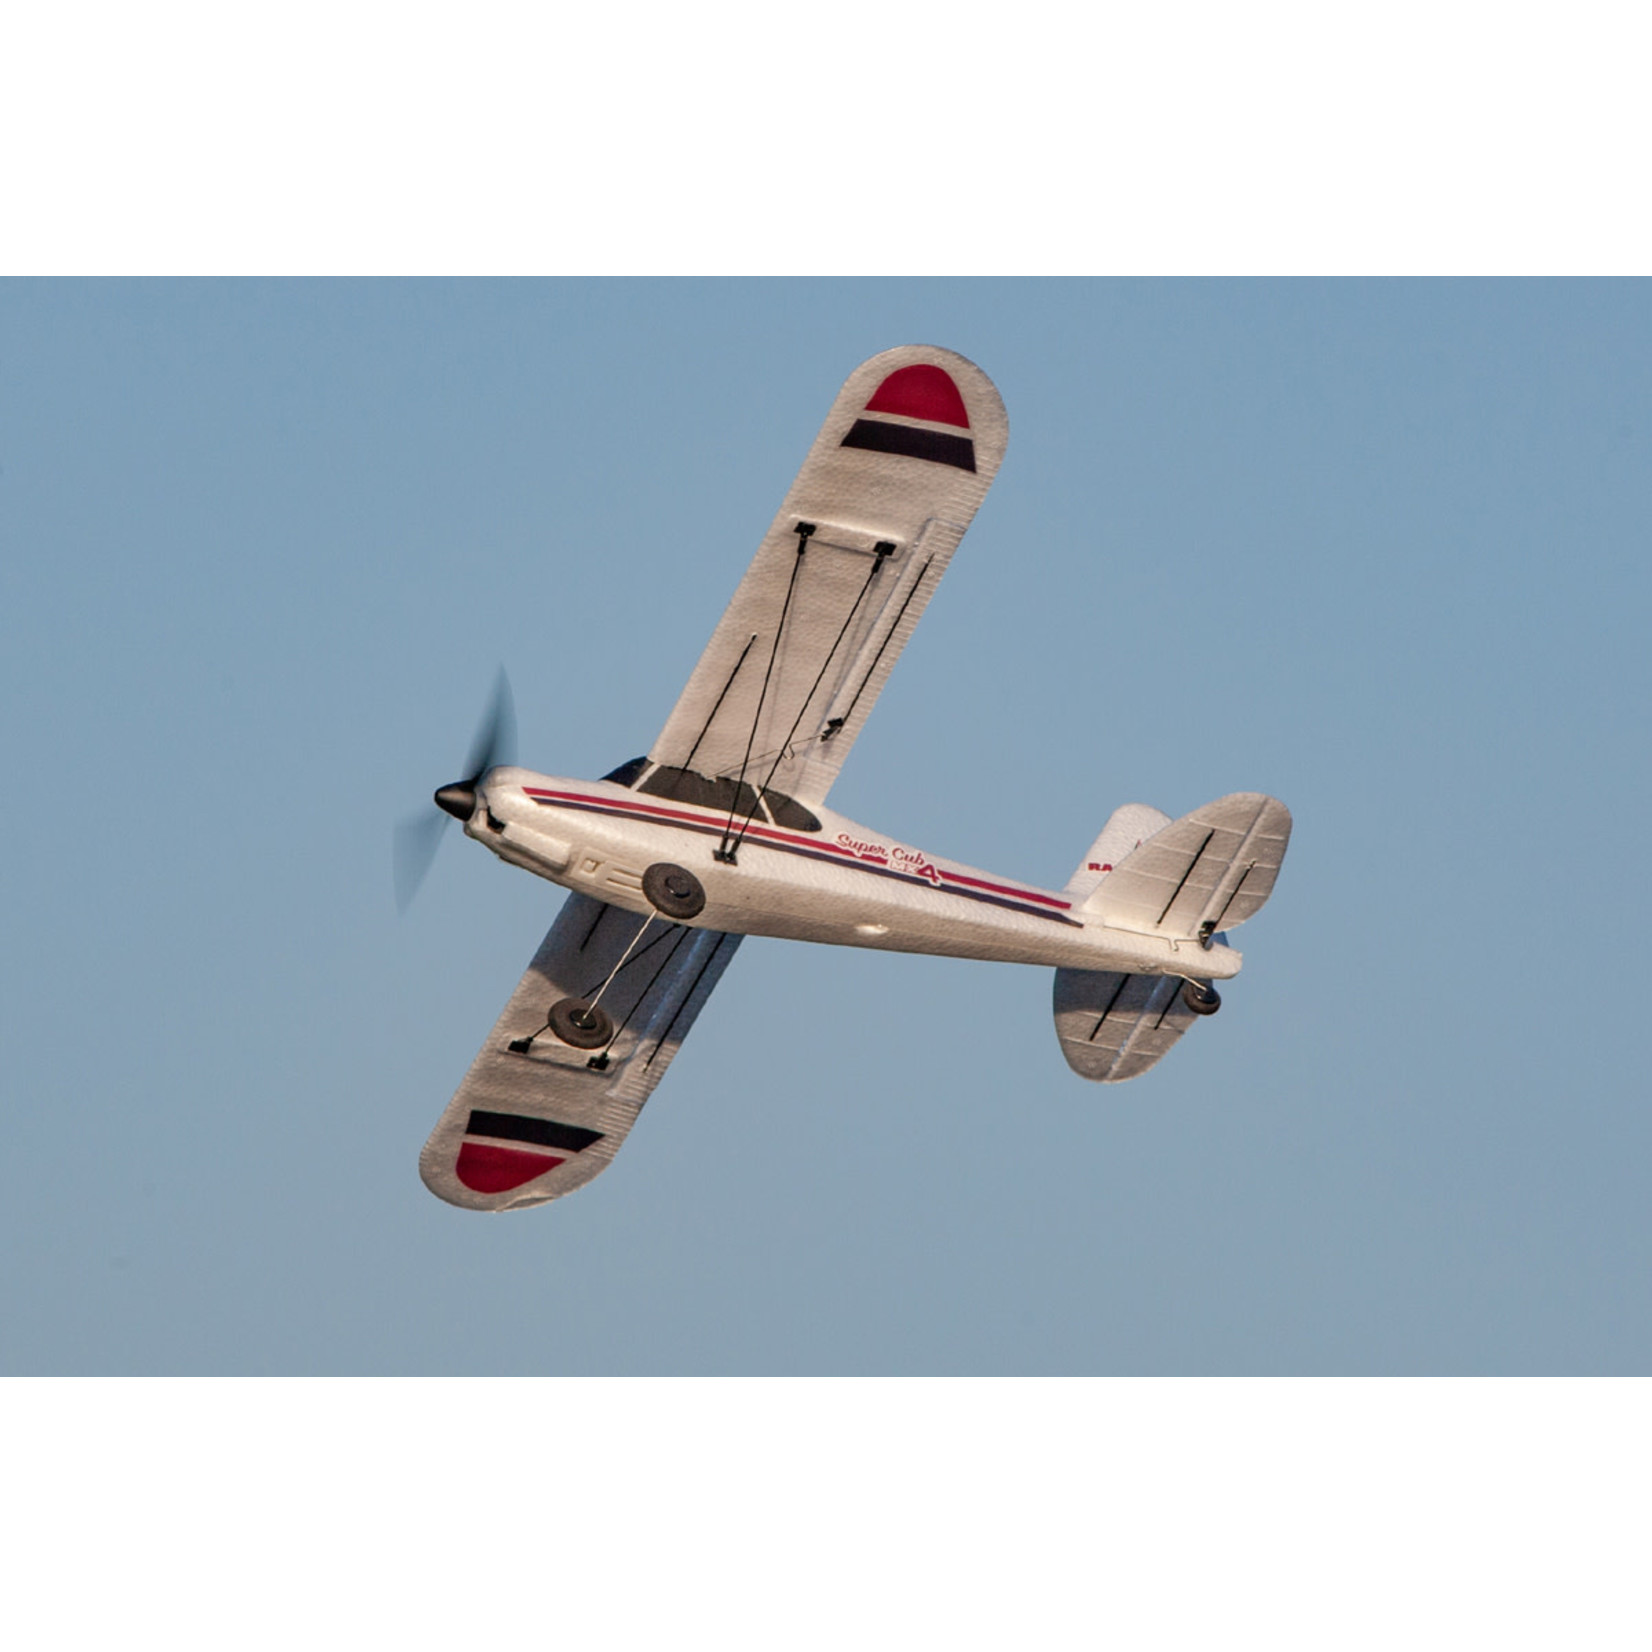 Rage RC Rage RC Super Cub MX4 Micro EP 4-Channel RTF Airplane with PASS System #RGRA1114